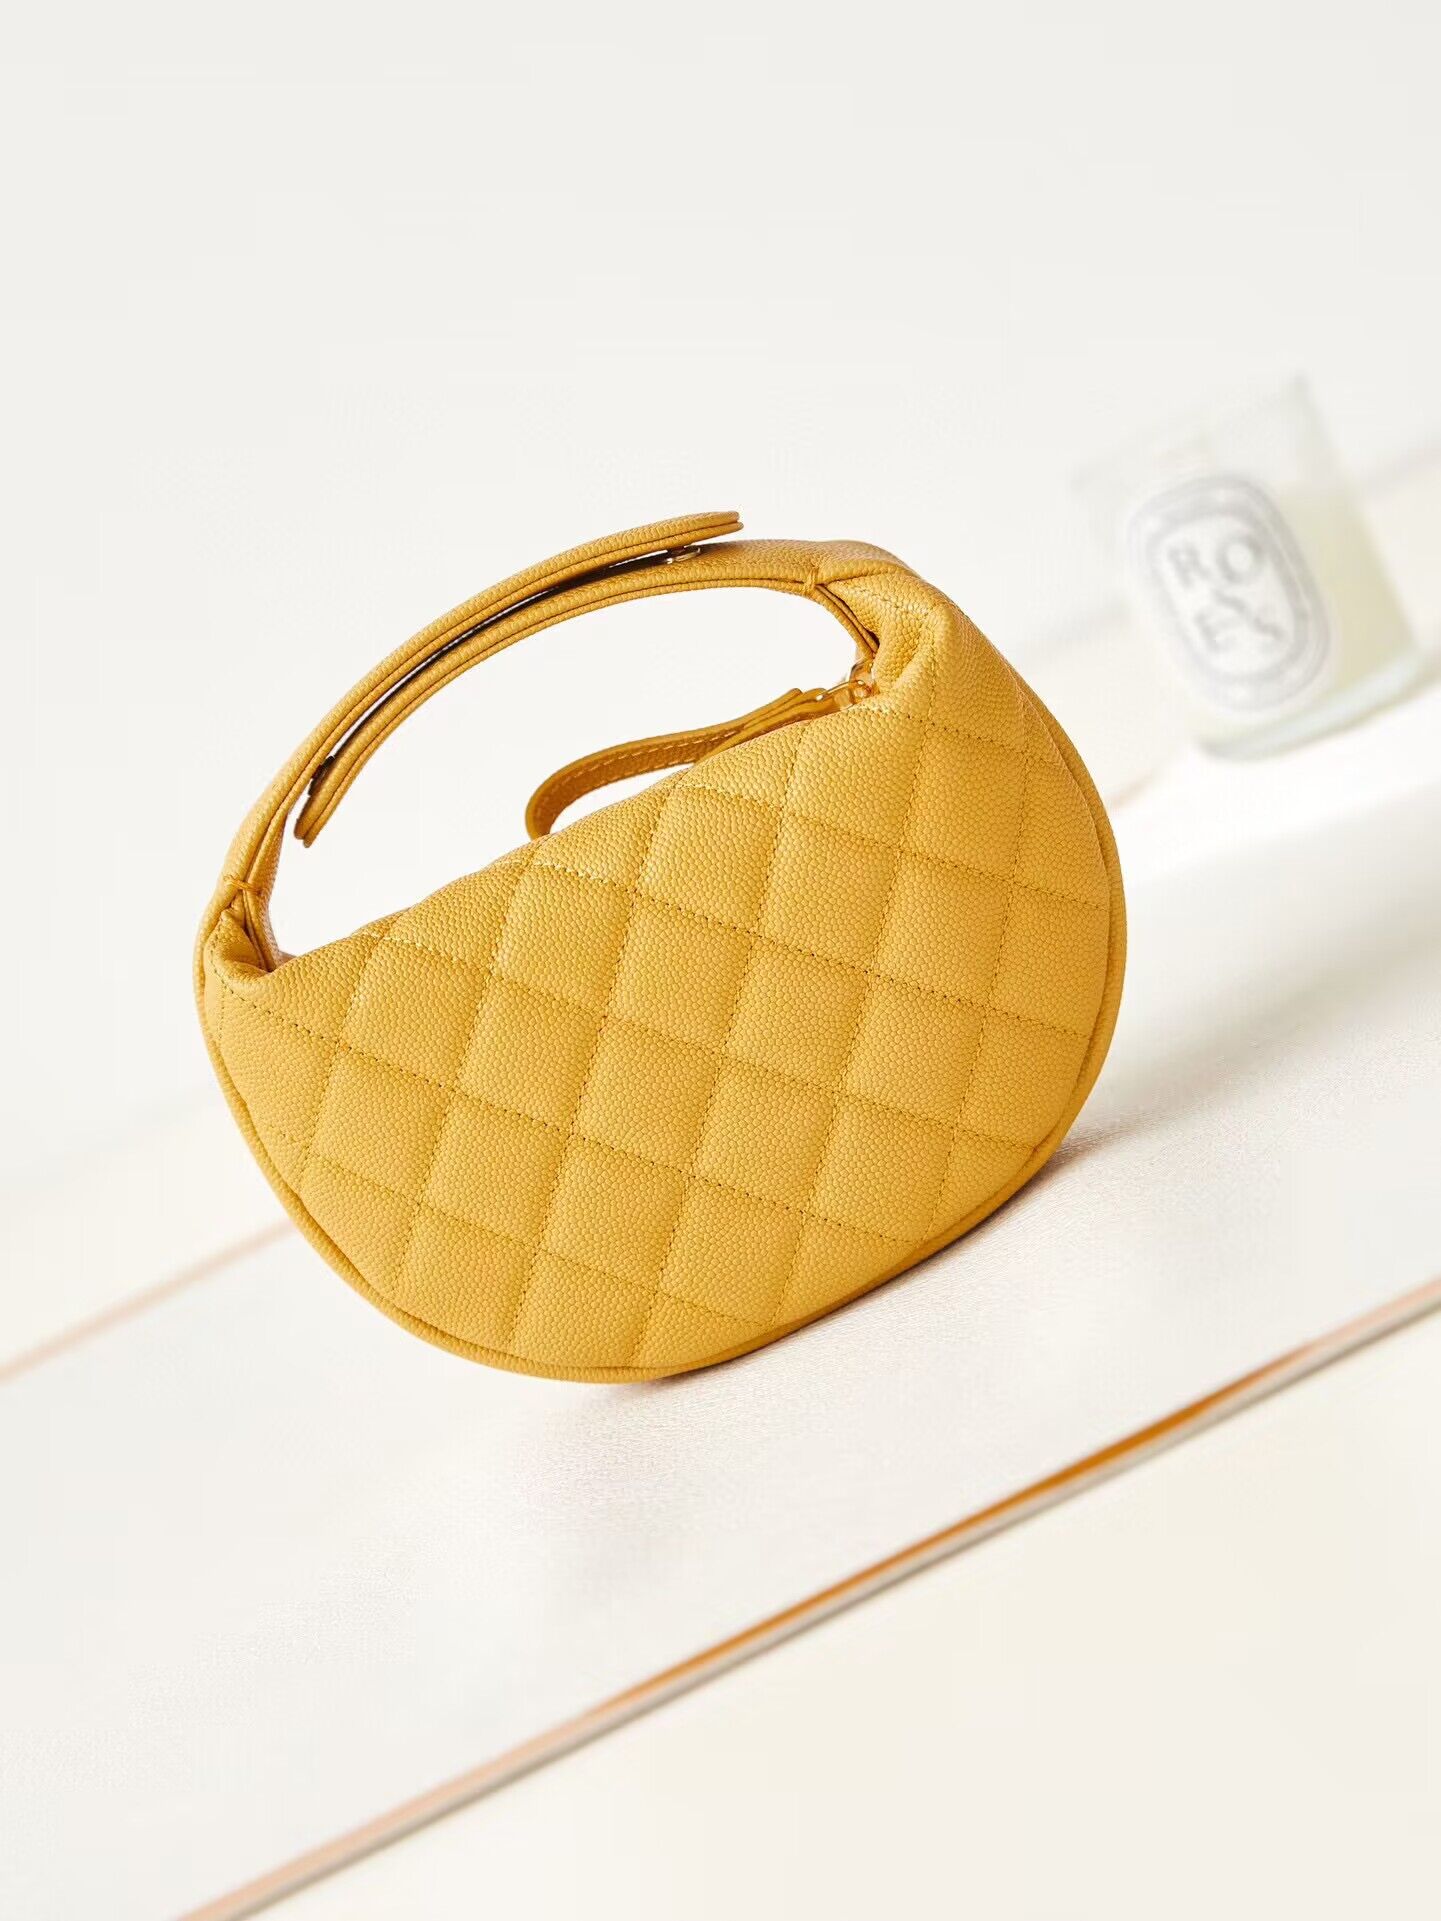 Chanel Caviar Quilted Polly Pocket AP3467 Yellow